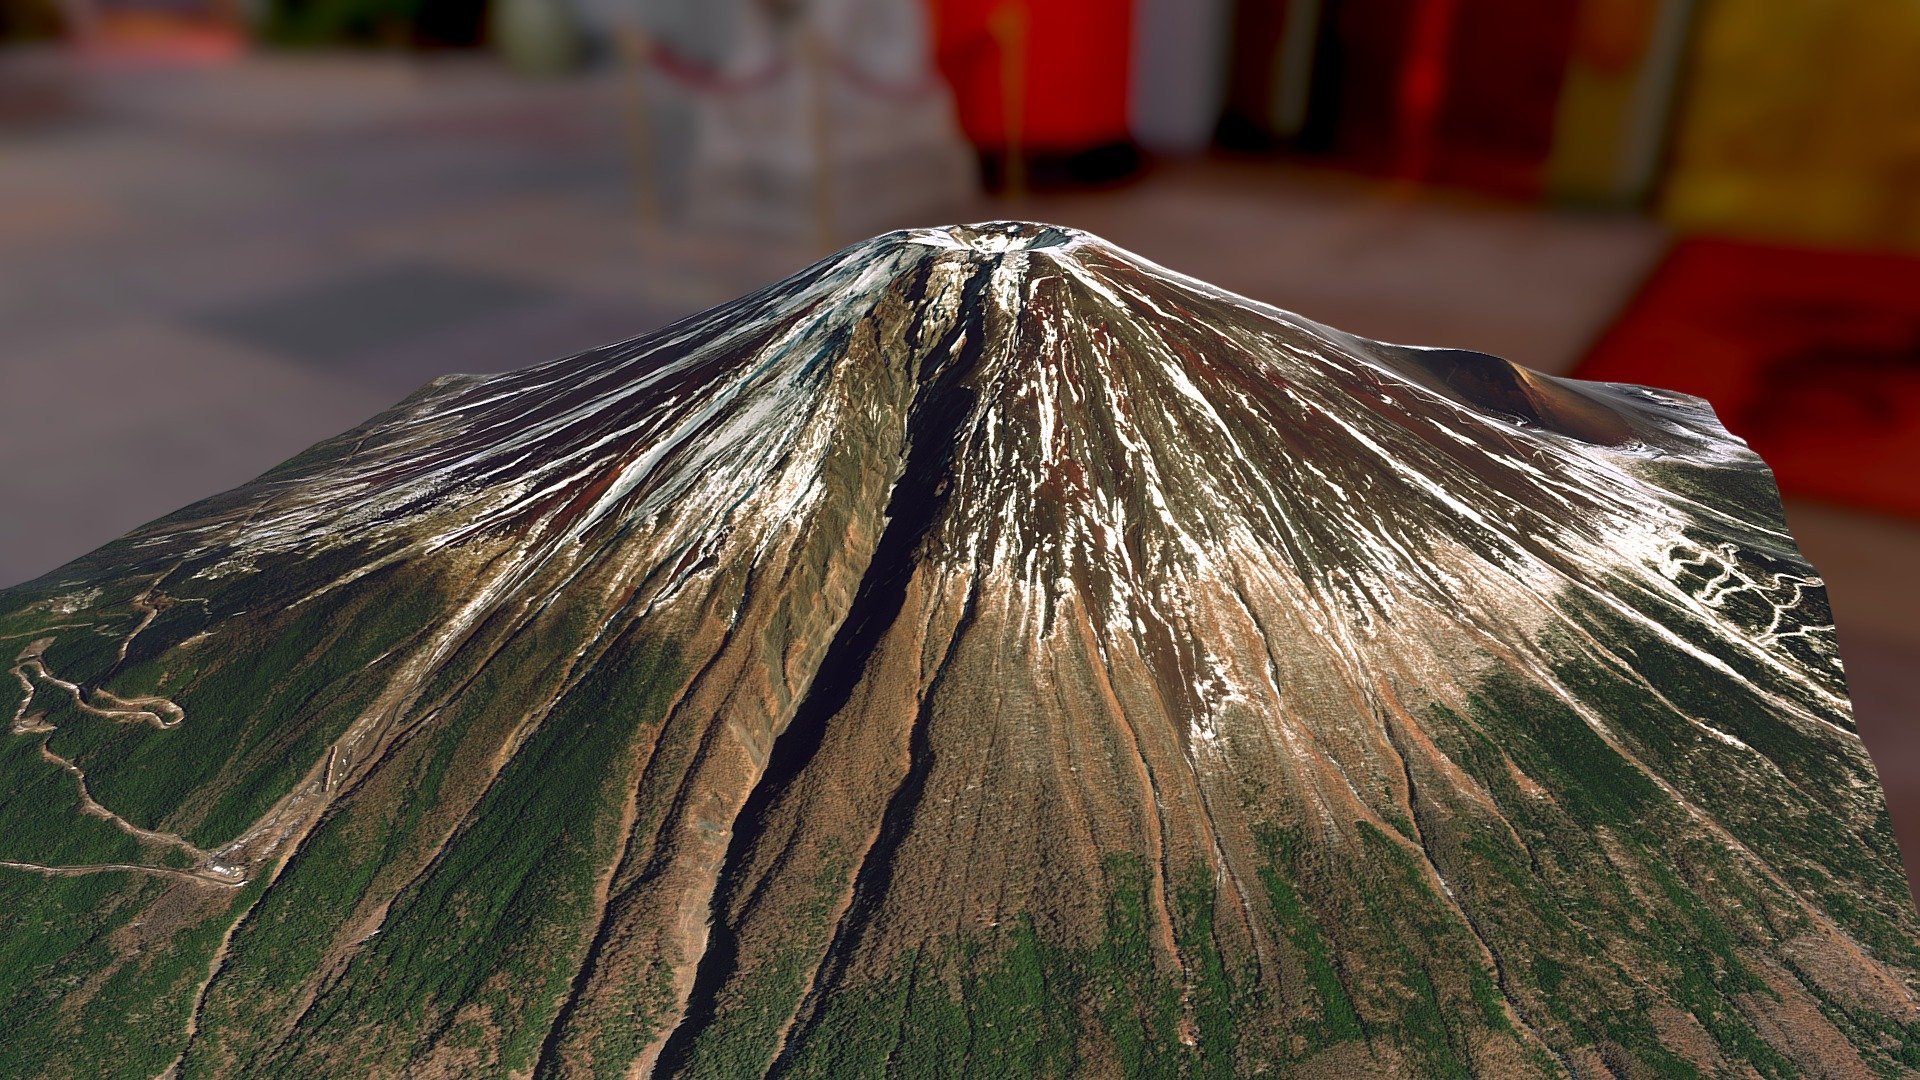 Mount Fuji Volcano in Japan.  This model features less snow than other models I made of this mountain.

Japan’s Mt. Fuji is an active volcano about 100 kilometers southwest of Tokyo. Commonly called “Fuji-san,” it’s the country’s tallest peak, at 3,776 meters. A pilgrimage site for centuries, it’s considered one of Japan’s 3 sacred mountains, and summit hikes remain a popular activity. Its iconic profile is the subject of numerous works of art, notably Edo Period prints by Hokusai and Hiroshige 3d model